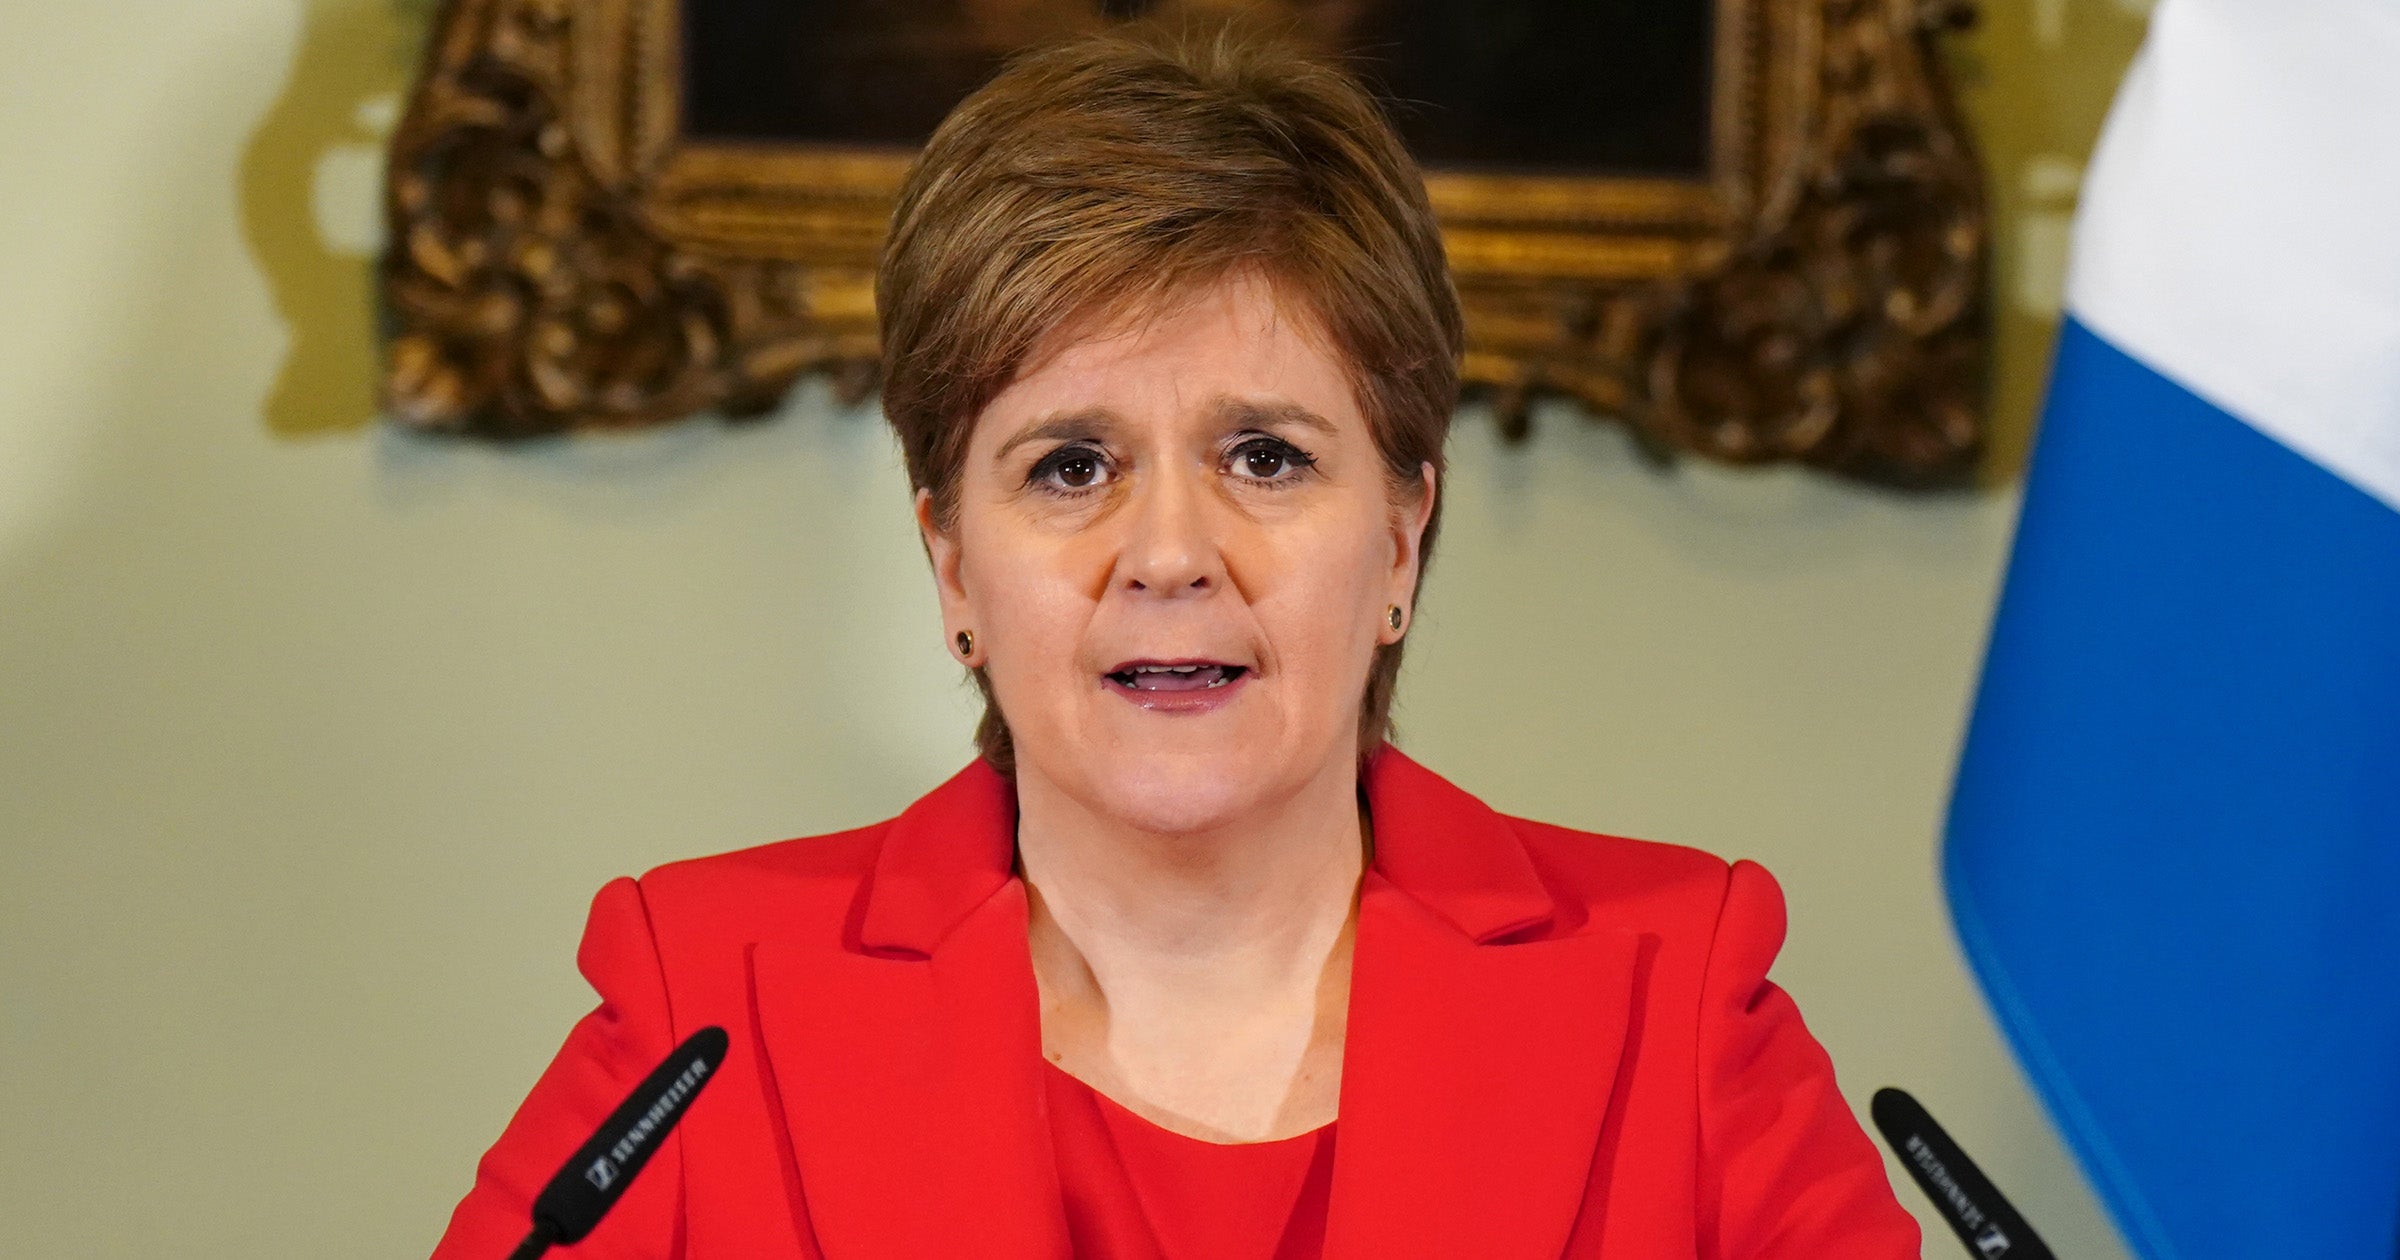 Sturgeon is now facing questions about how much she knew at the time of her resignation in February